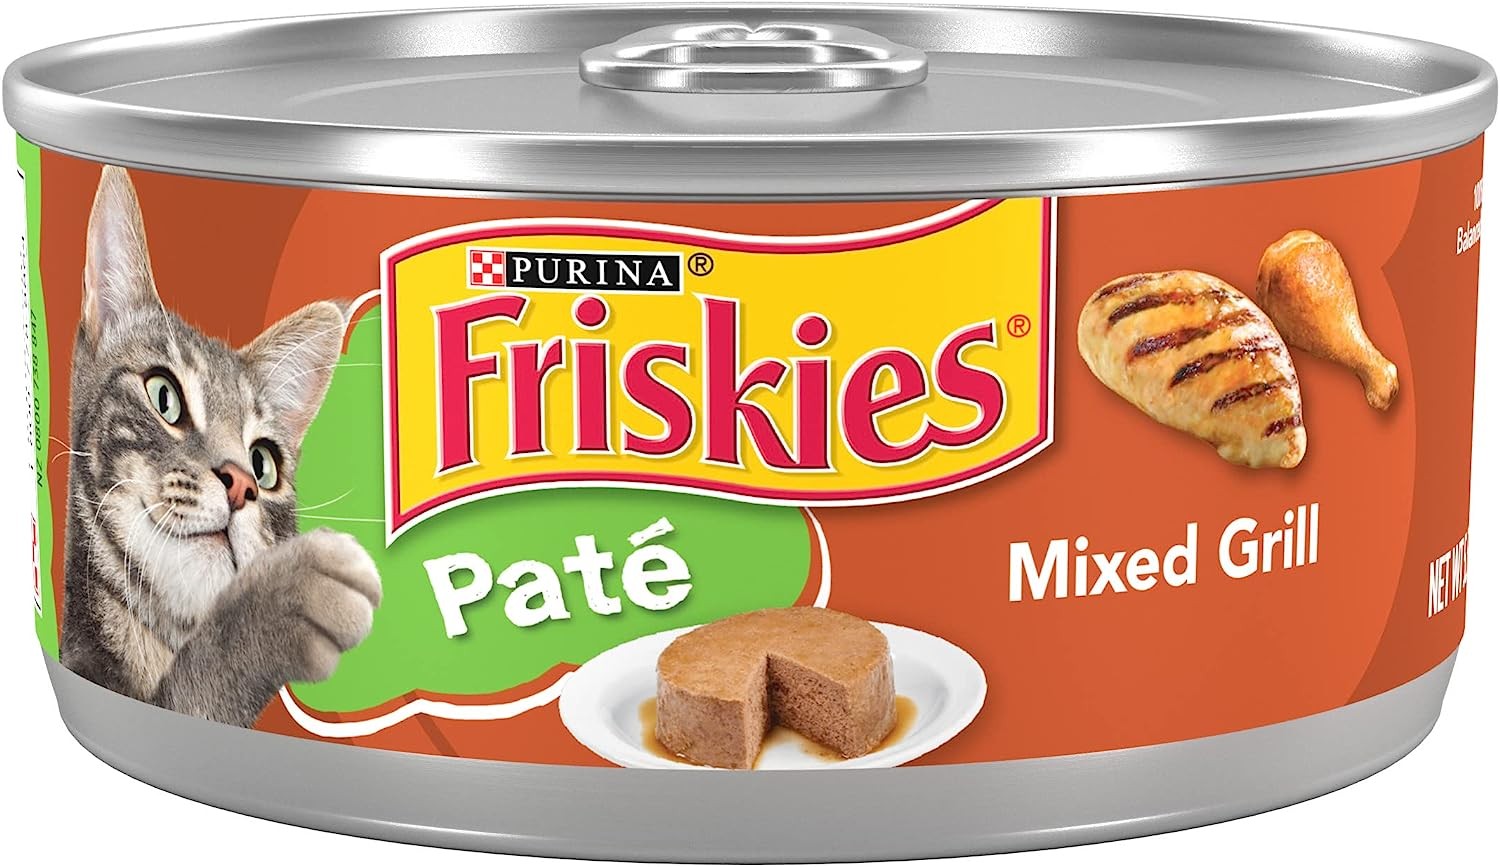 Purina Friskies Pate Mixed Grill Dinner